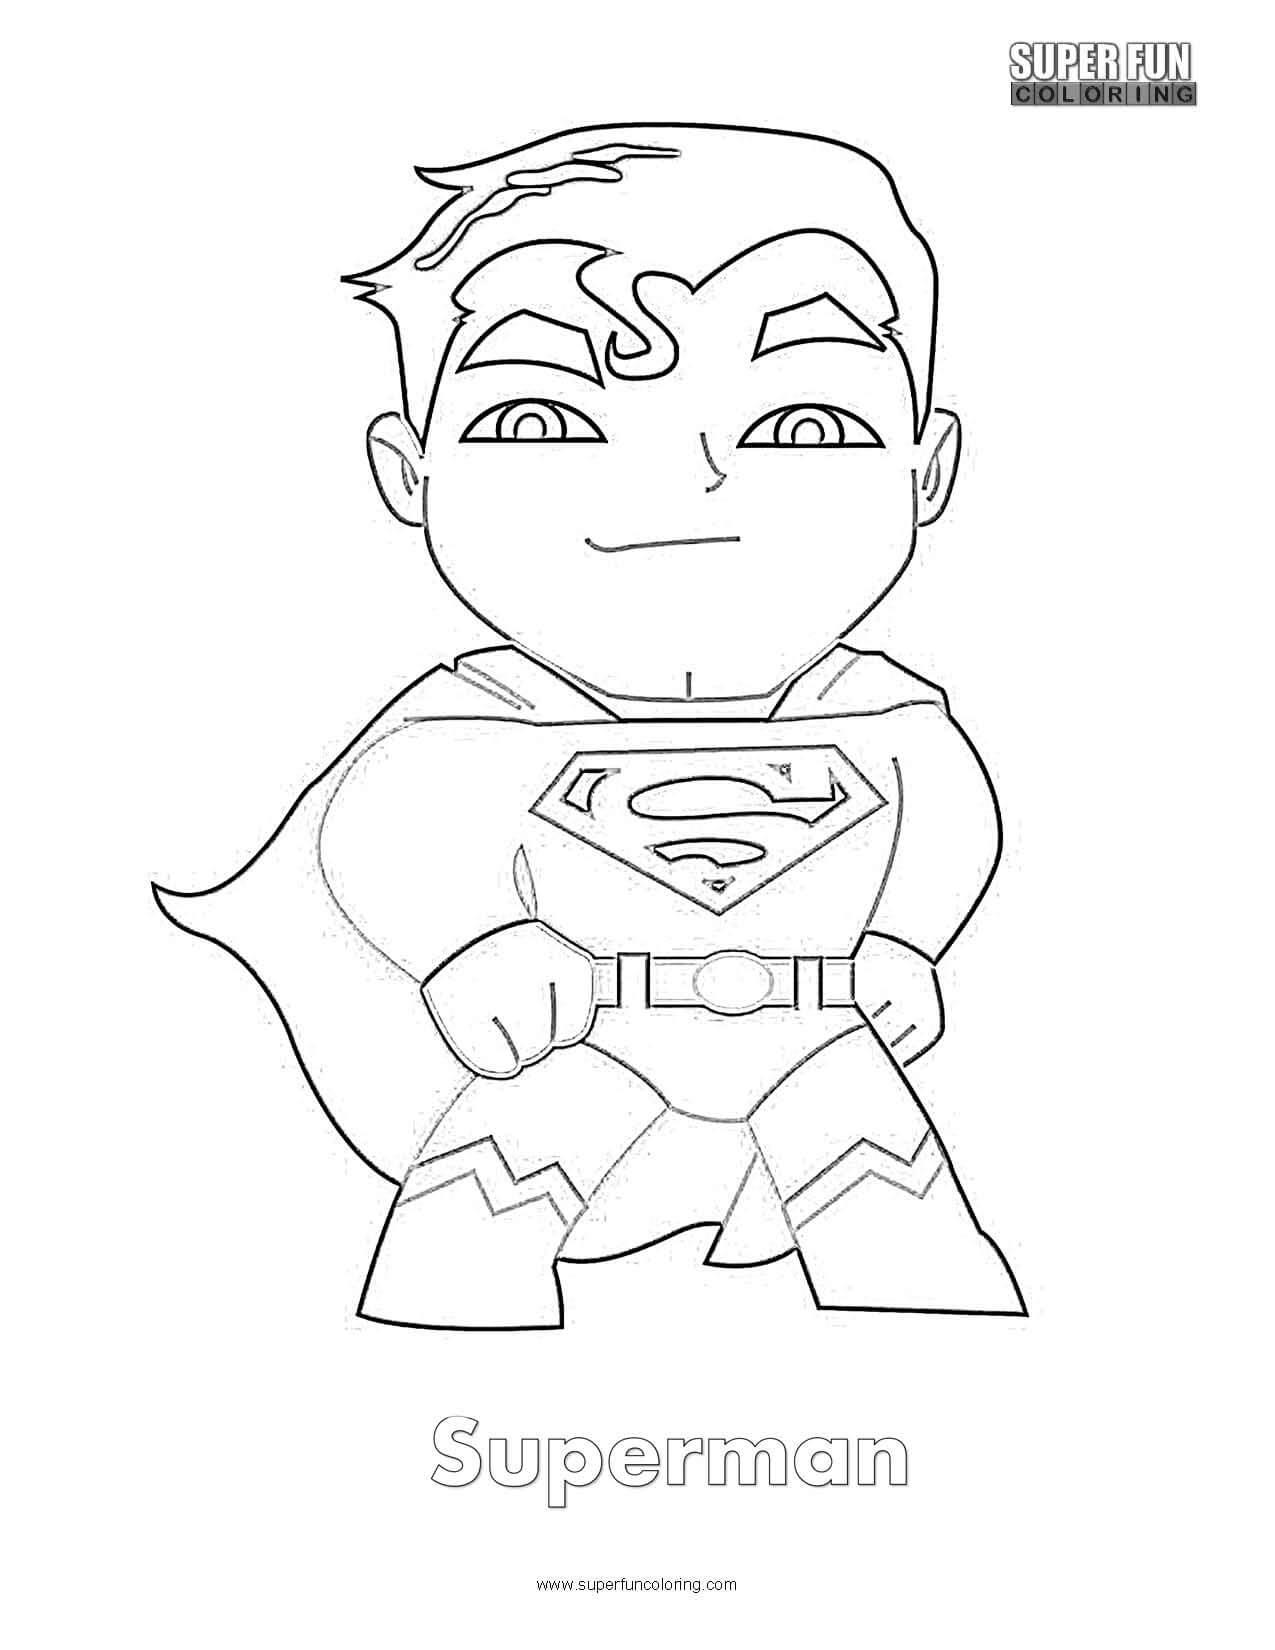 Superman Coloring Page